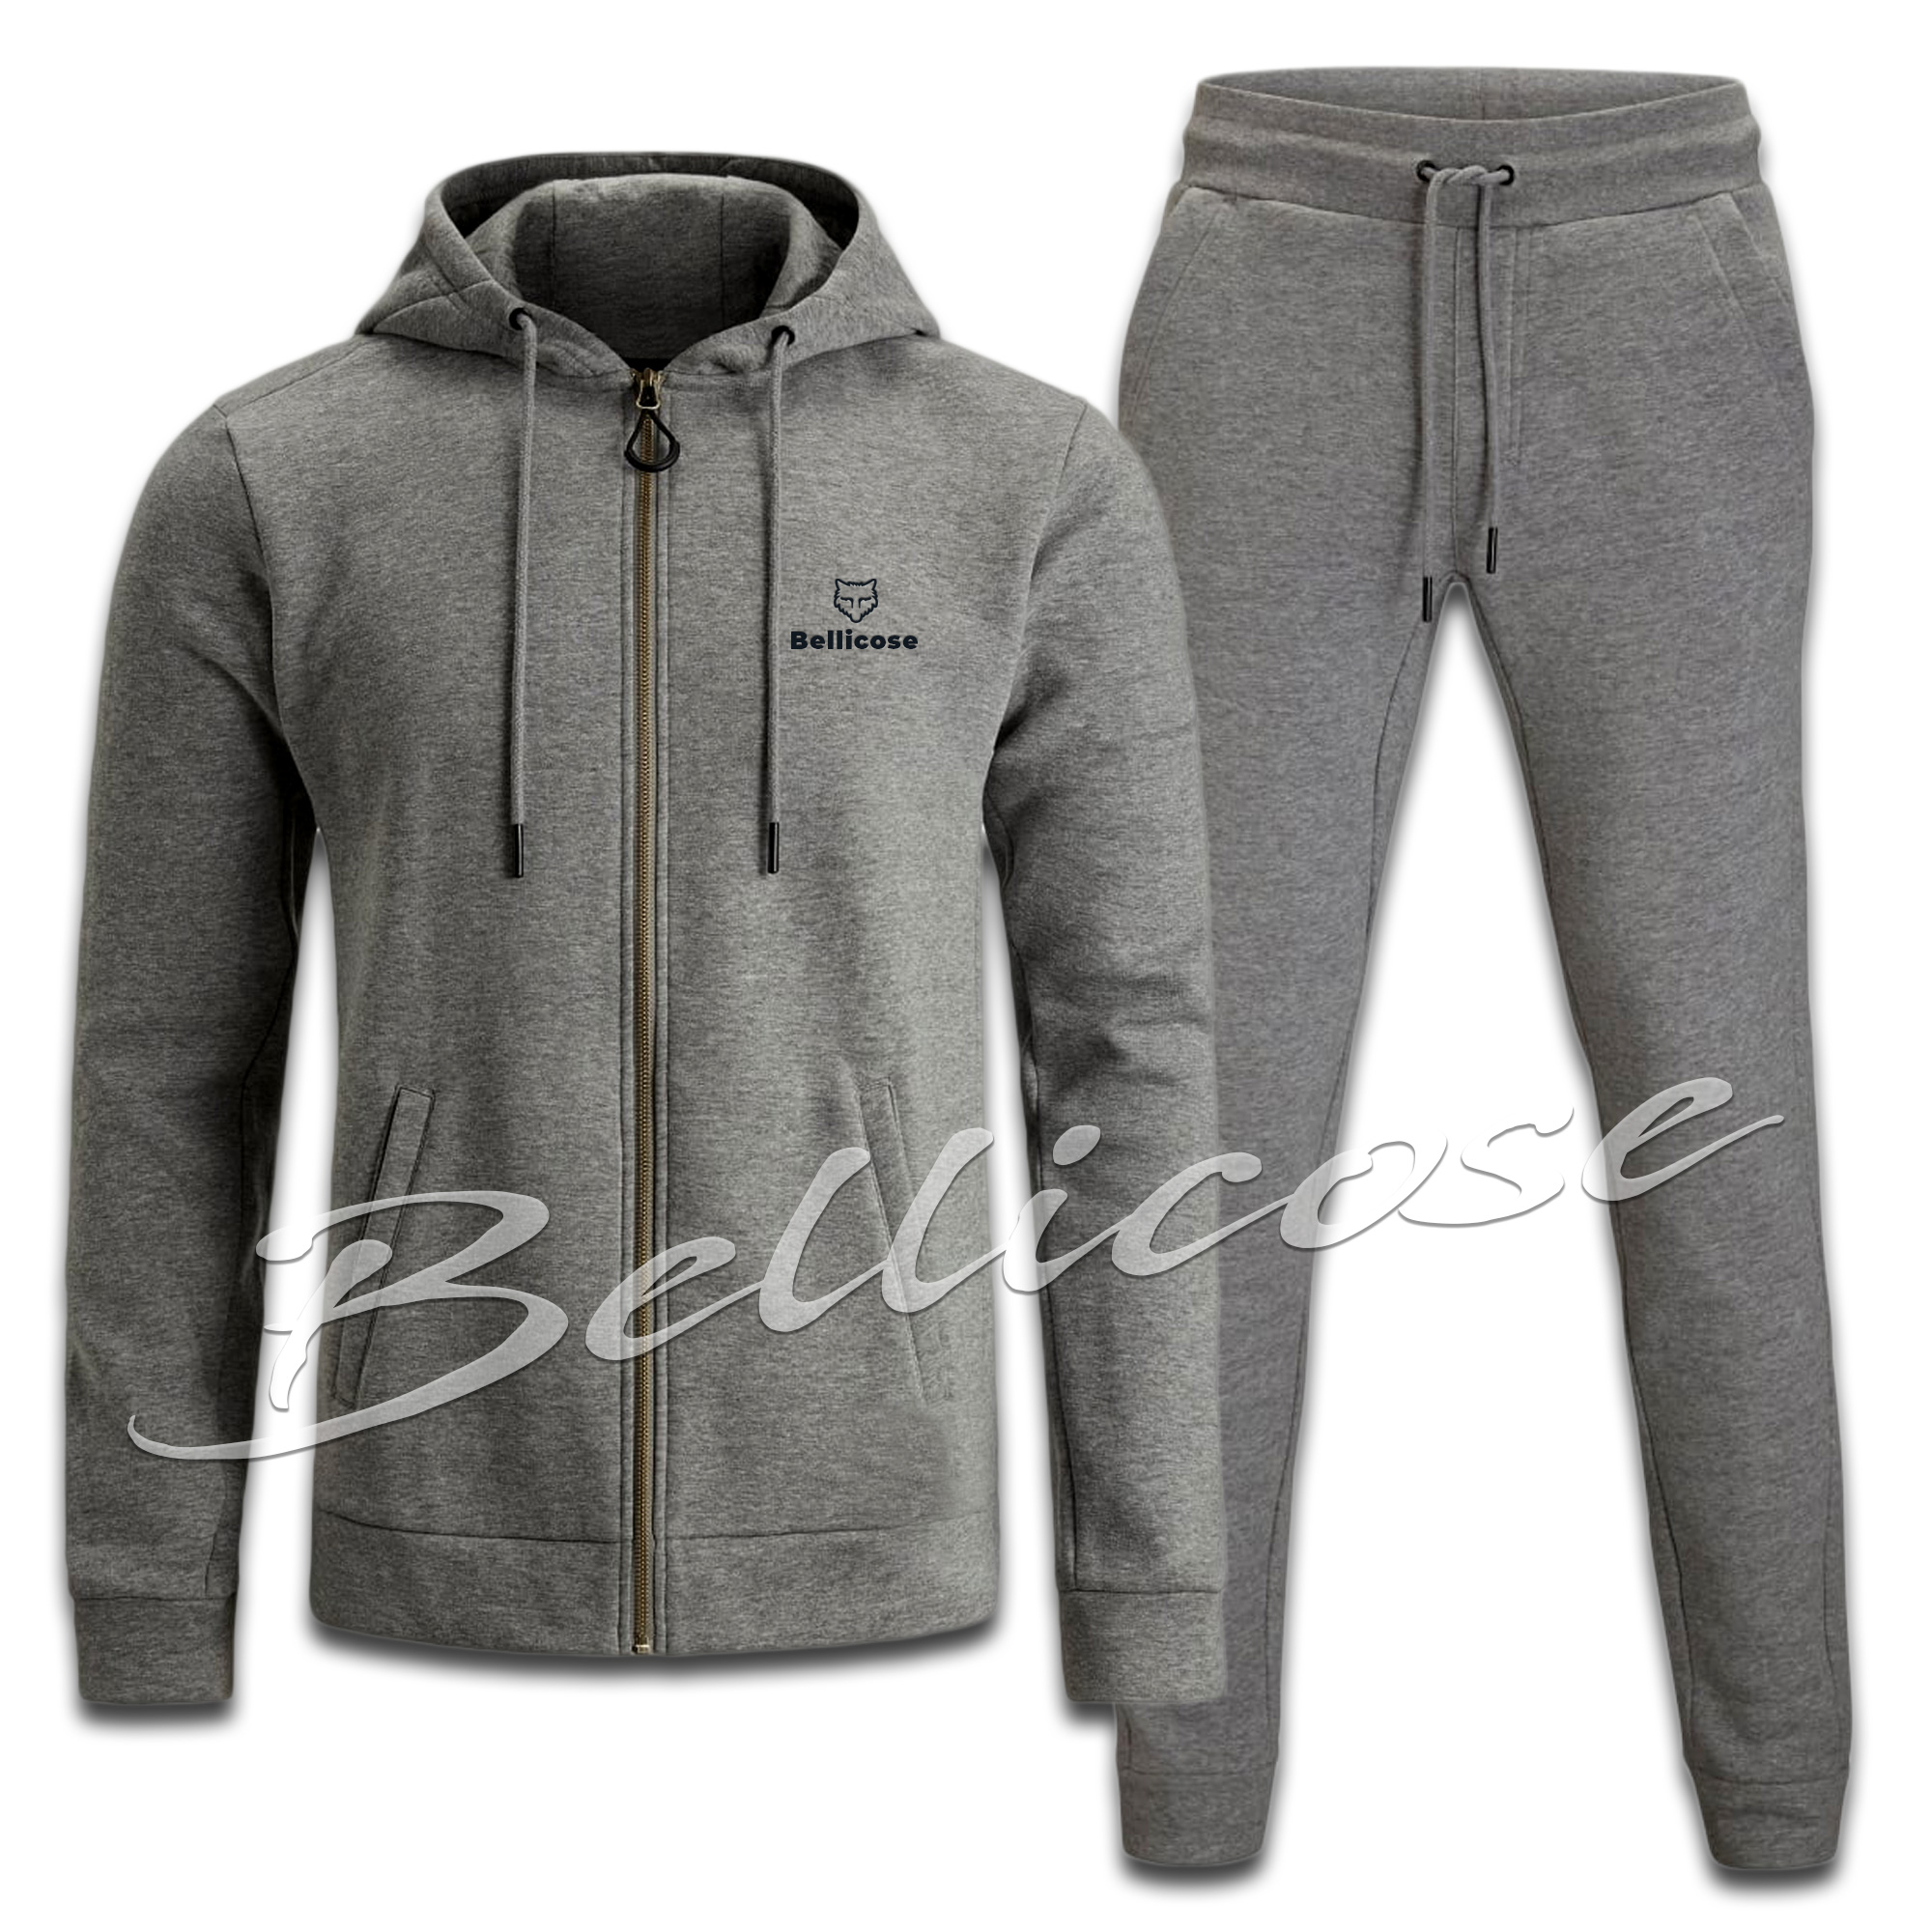 Mens Sports Fleece Tracksuit Set with Fleece Hooded Top | The Bellicose ...